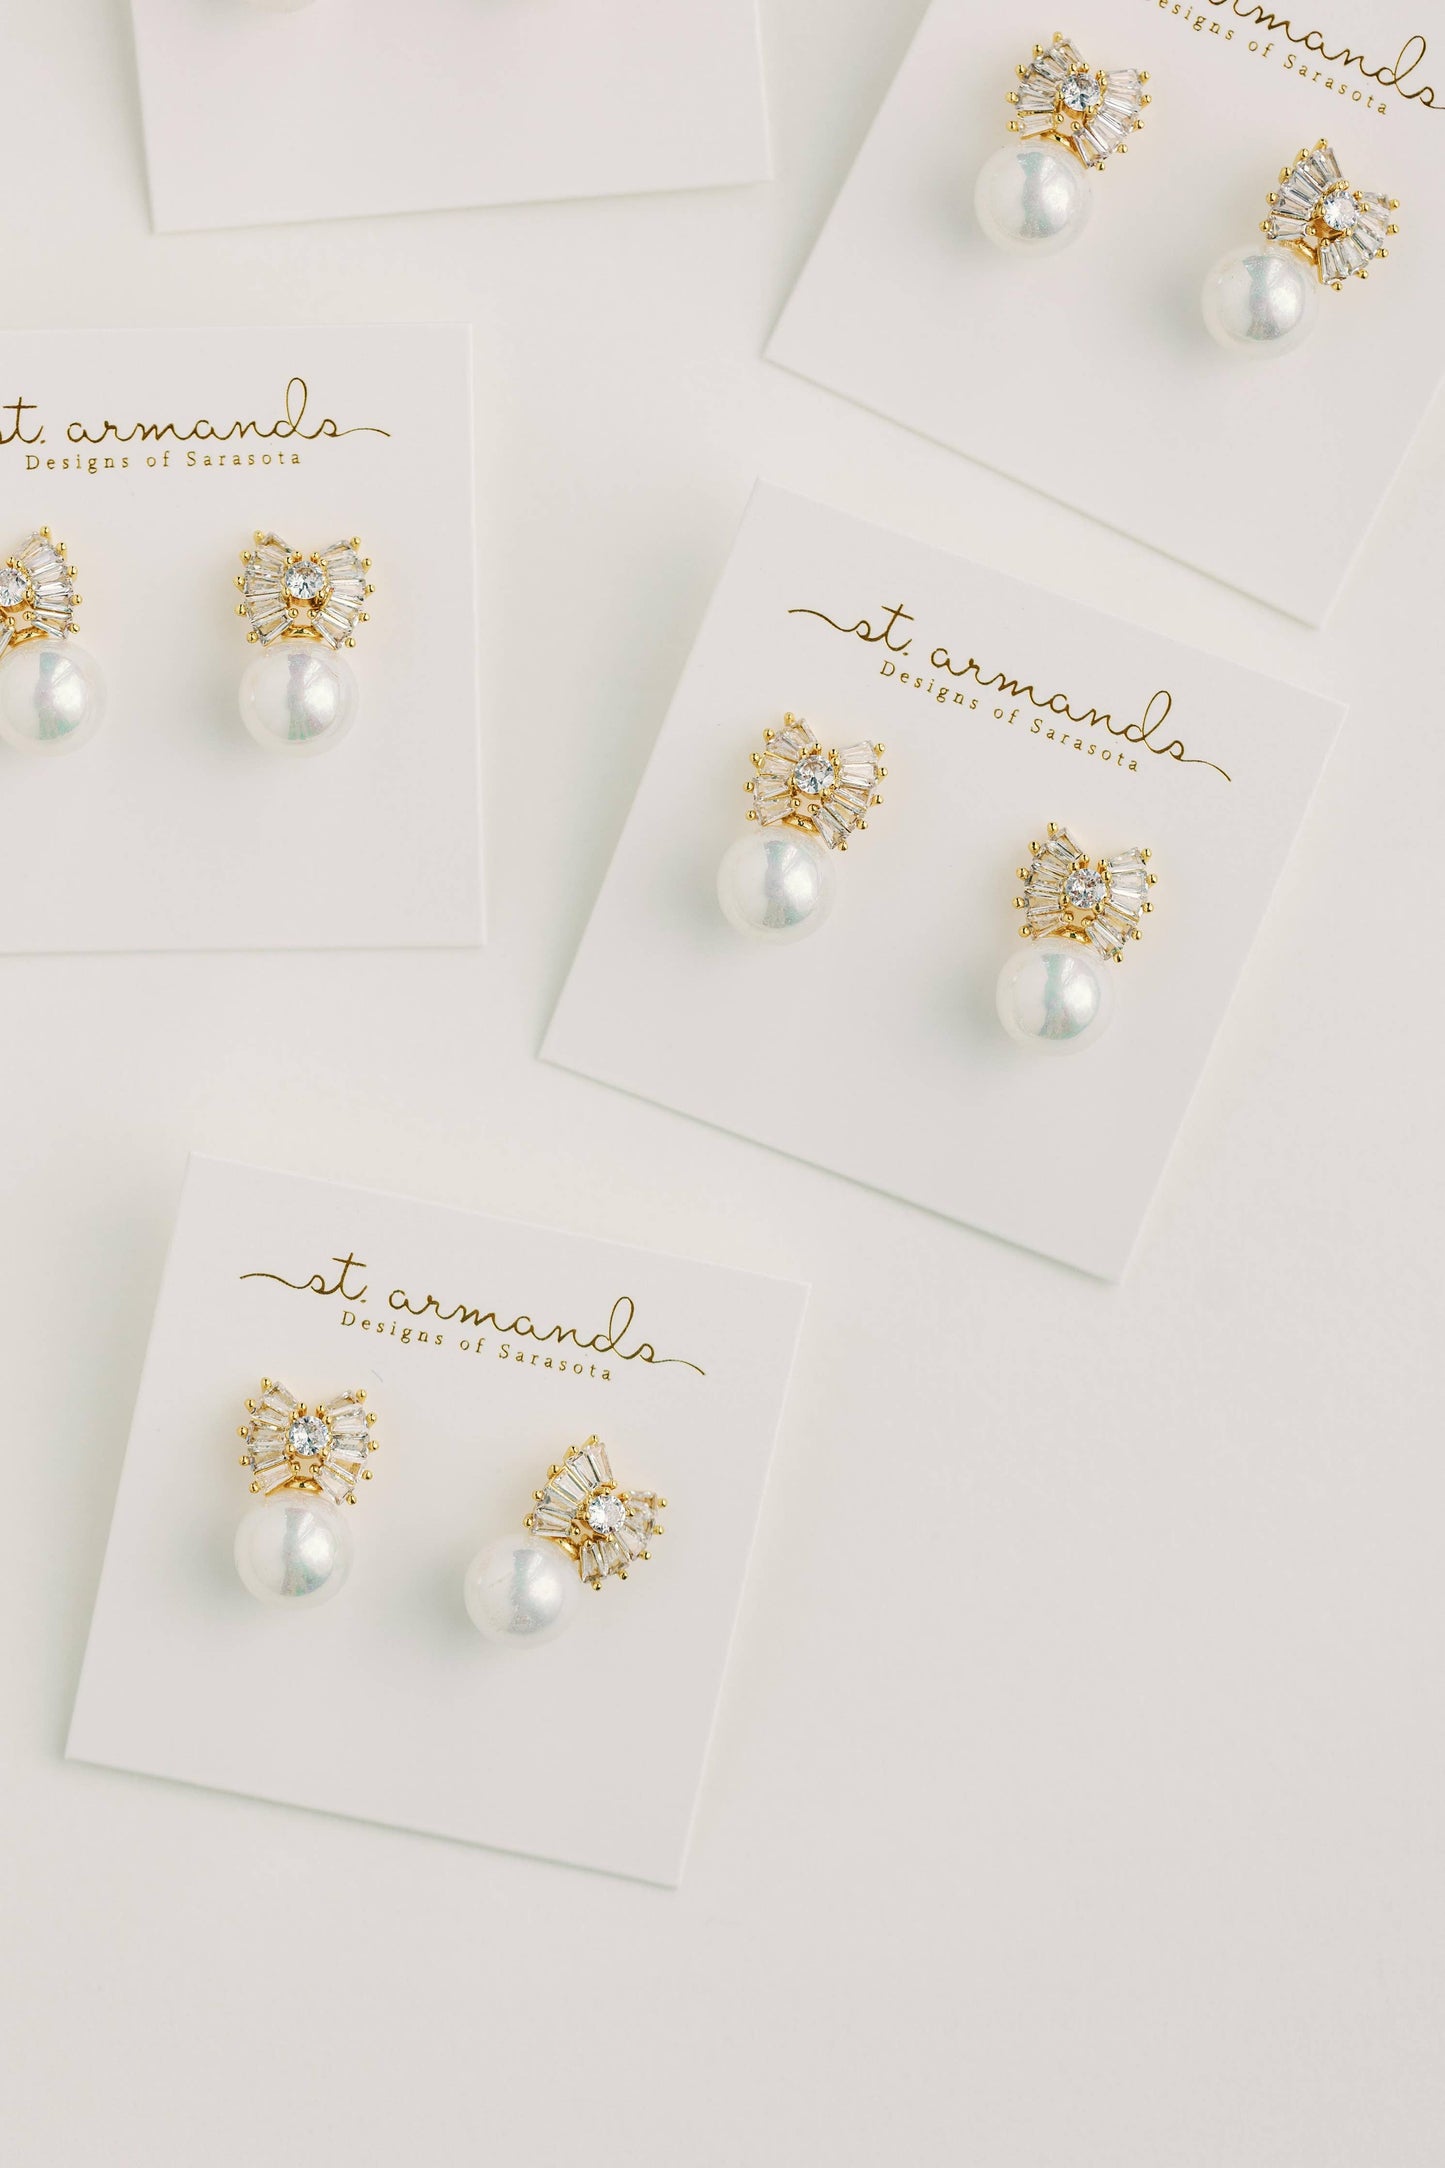 St Armands Designs of Sarasota - Gold Pearl Sparkler Statement Bow Earrings